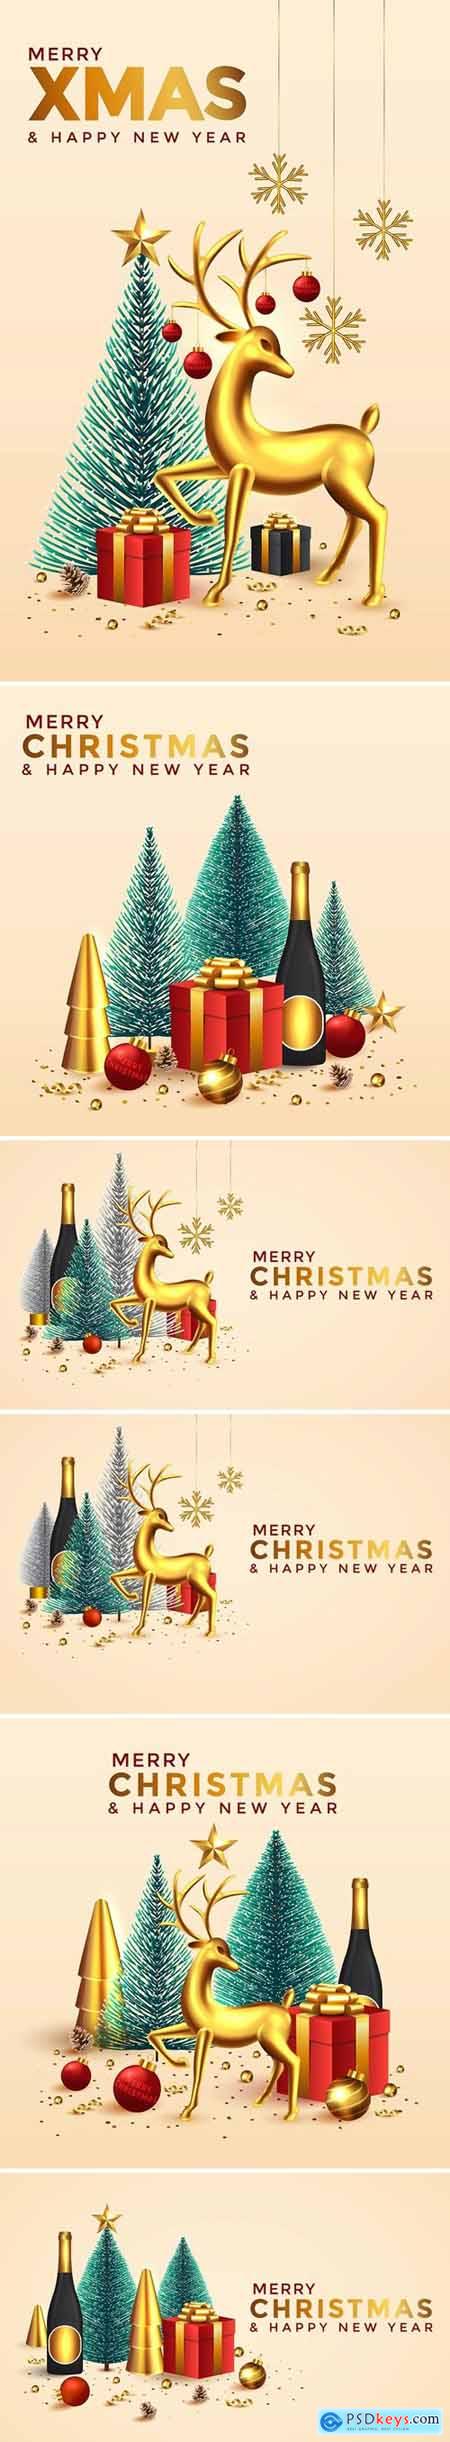 Christmas and New Year background